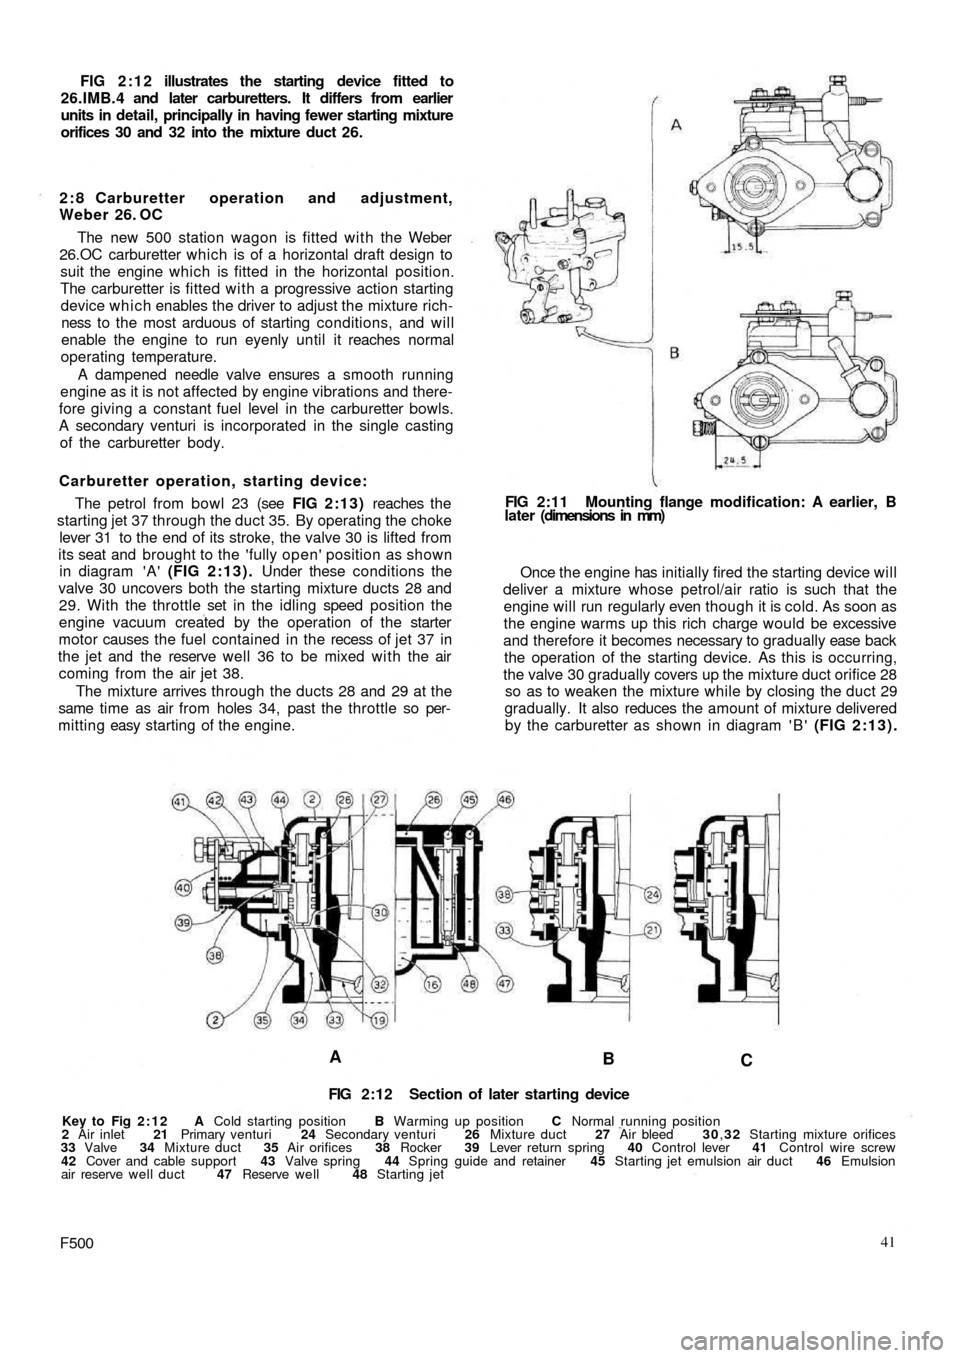 FIAT 500 1957 1.G Workshop Manual FIG 2:12 illustrates the starting device fitted to
26.IMB.4 and later carburetters. It differs from earlier
units in detail, principally in having fewer starting mixture
orifices 30 and 32 into the mi